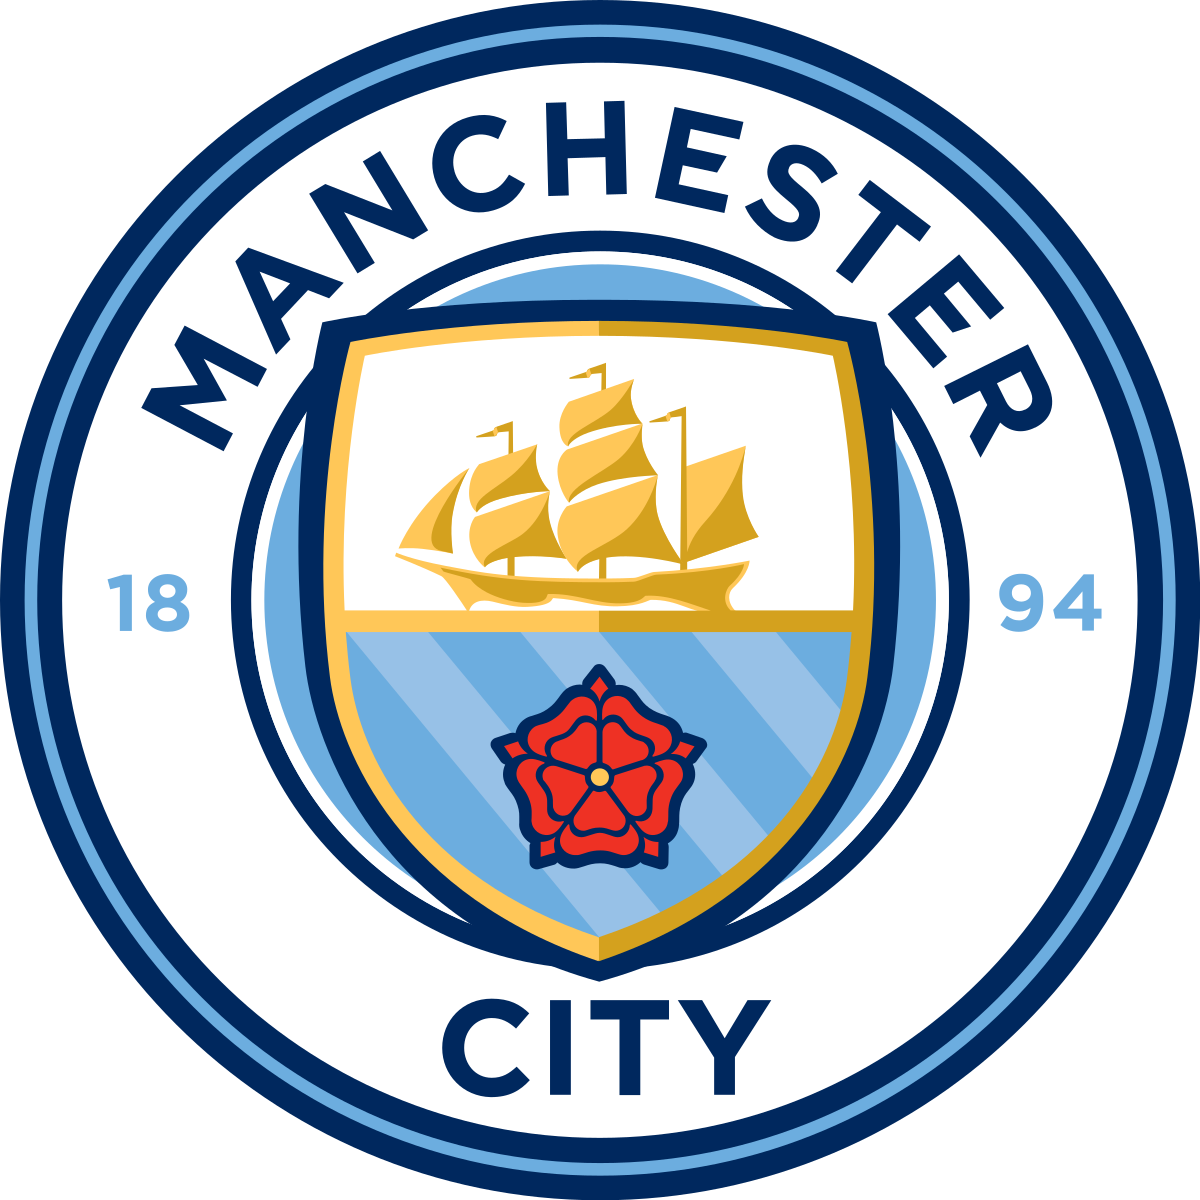 Southernmost Design Manchester City Themed Casual Athletic Running Shoe Mens Womens Sizes Sneakers Premier League Soccer MCFC KDB Aguero Apparel and Gifts for Men and Women 